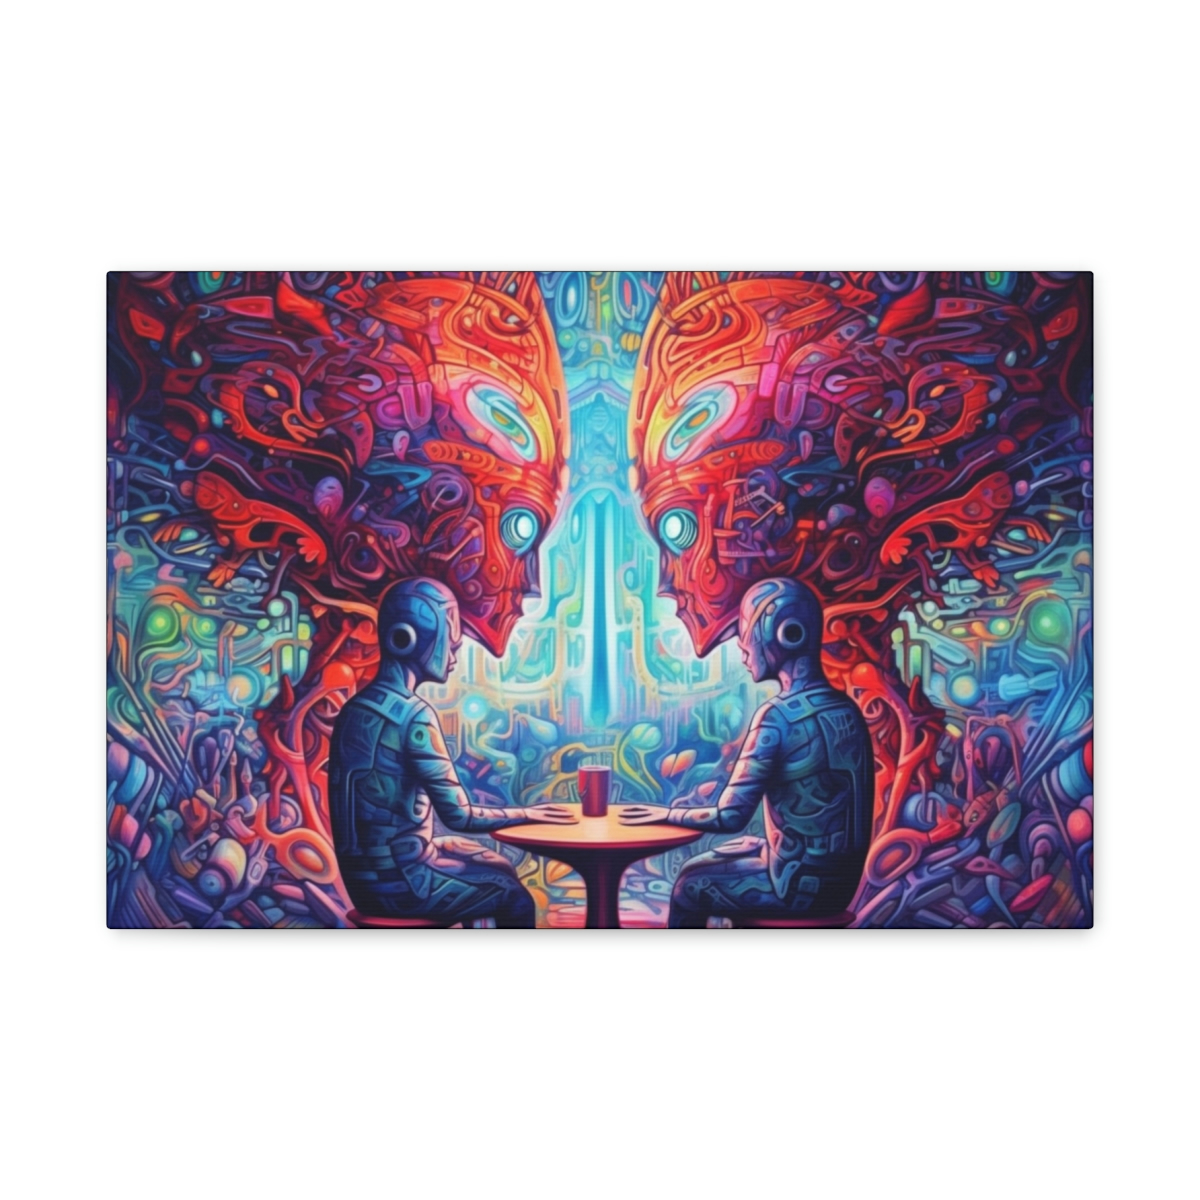 DMT Art Canvas Print: A Quick Chat At The End Of Time